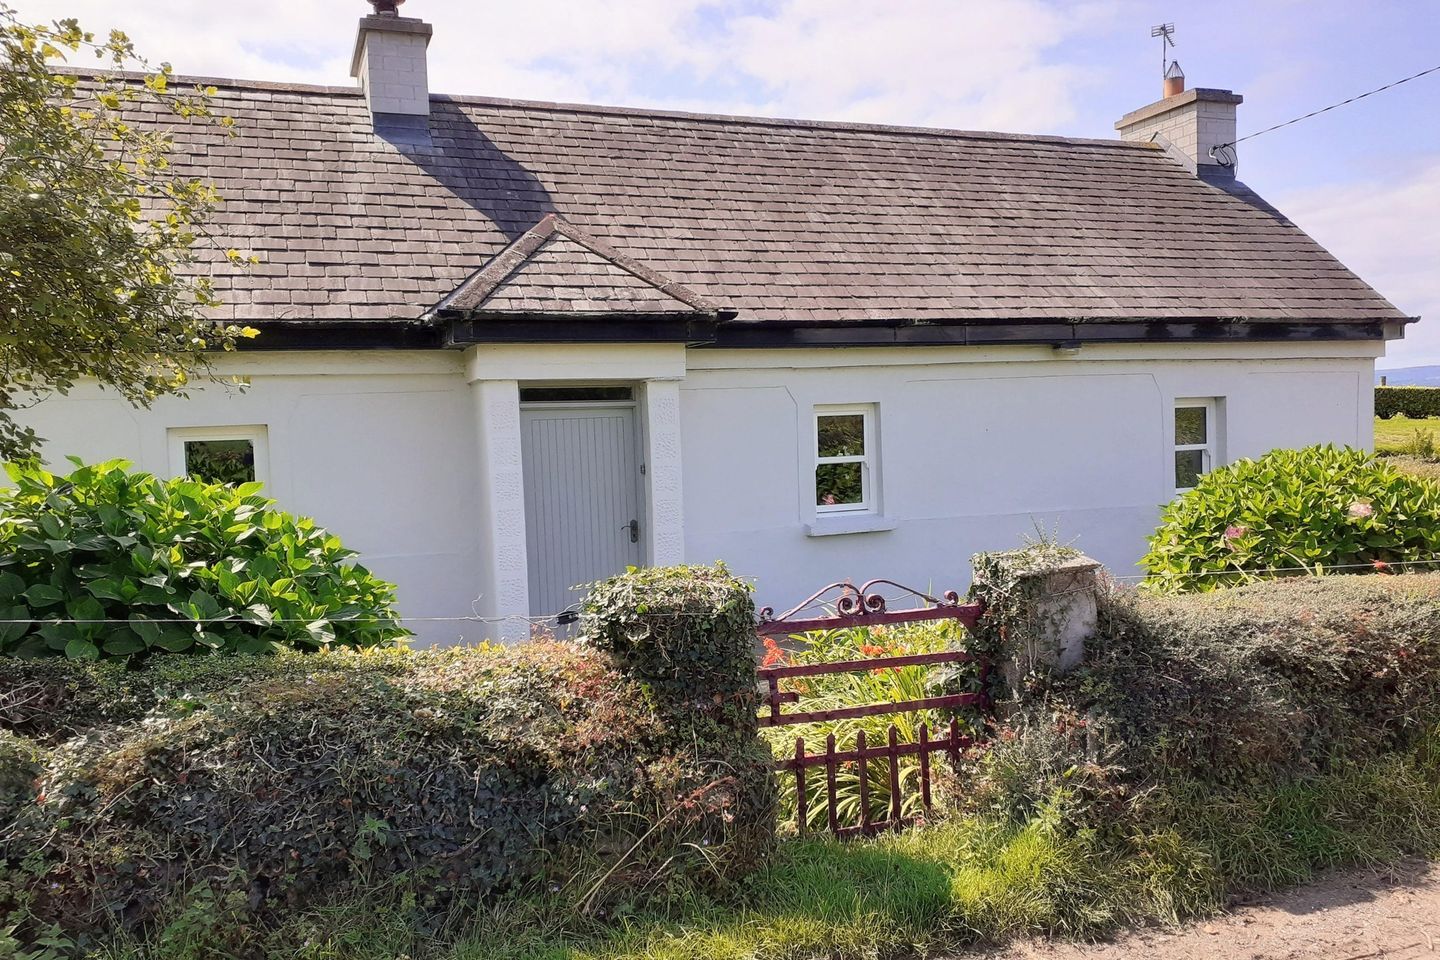 Ref. 1108125 Lackaroe Cottage, Portroe, Nenagh, Tipperary Town, Co. Tipperary